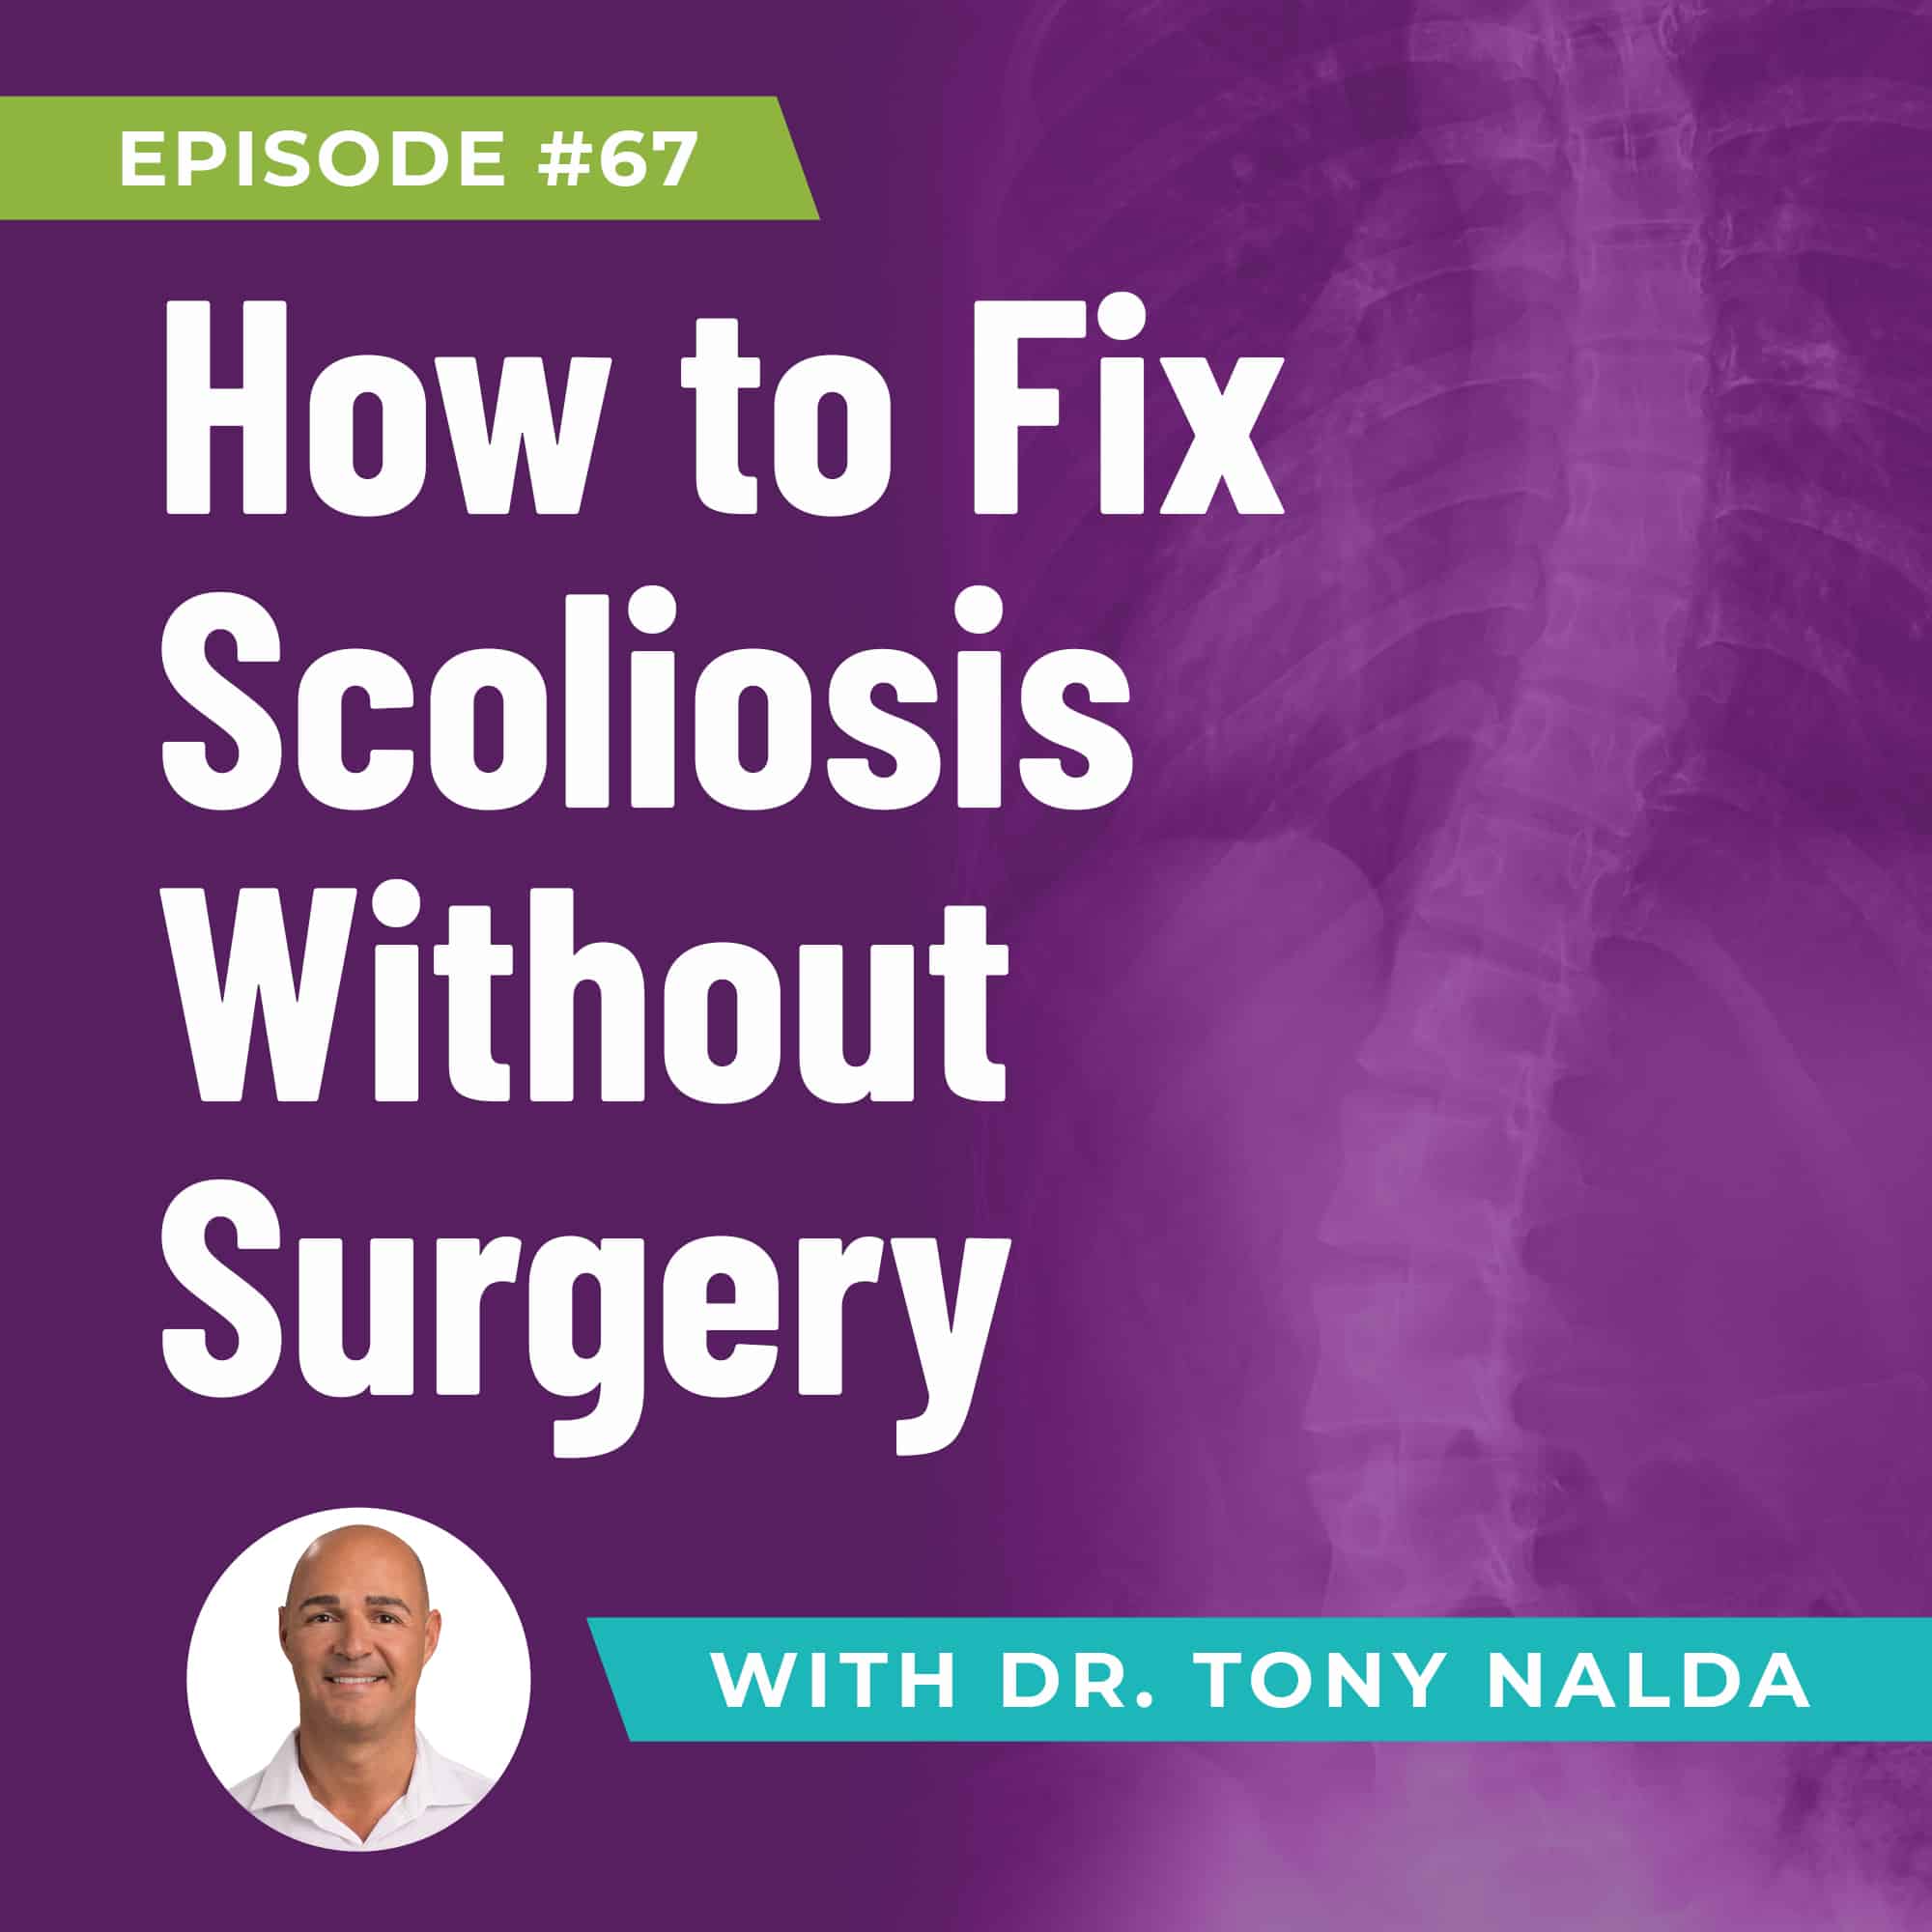 How to Fix Scoliosis Without Surgery